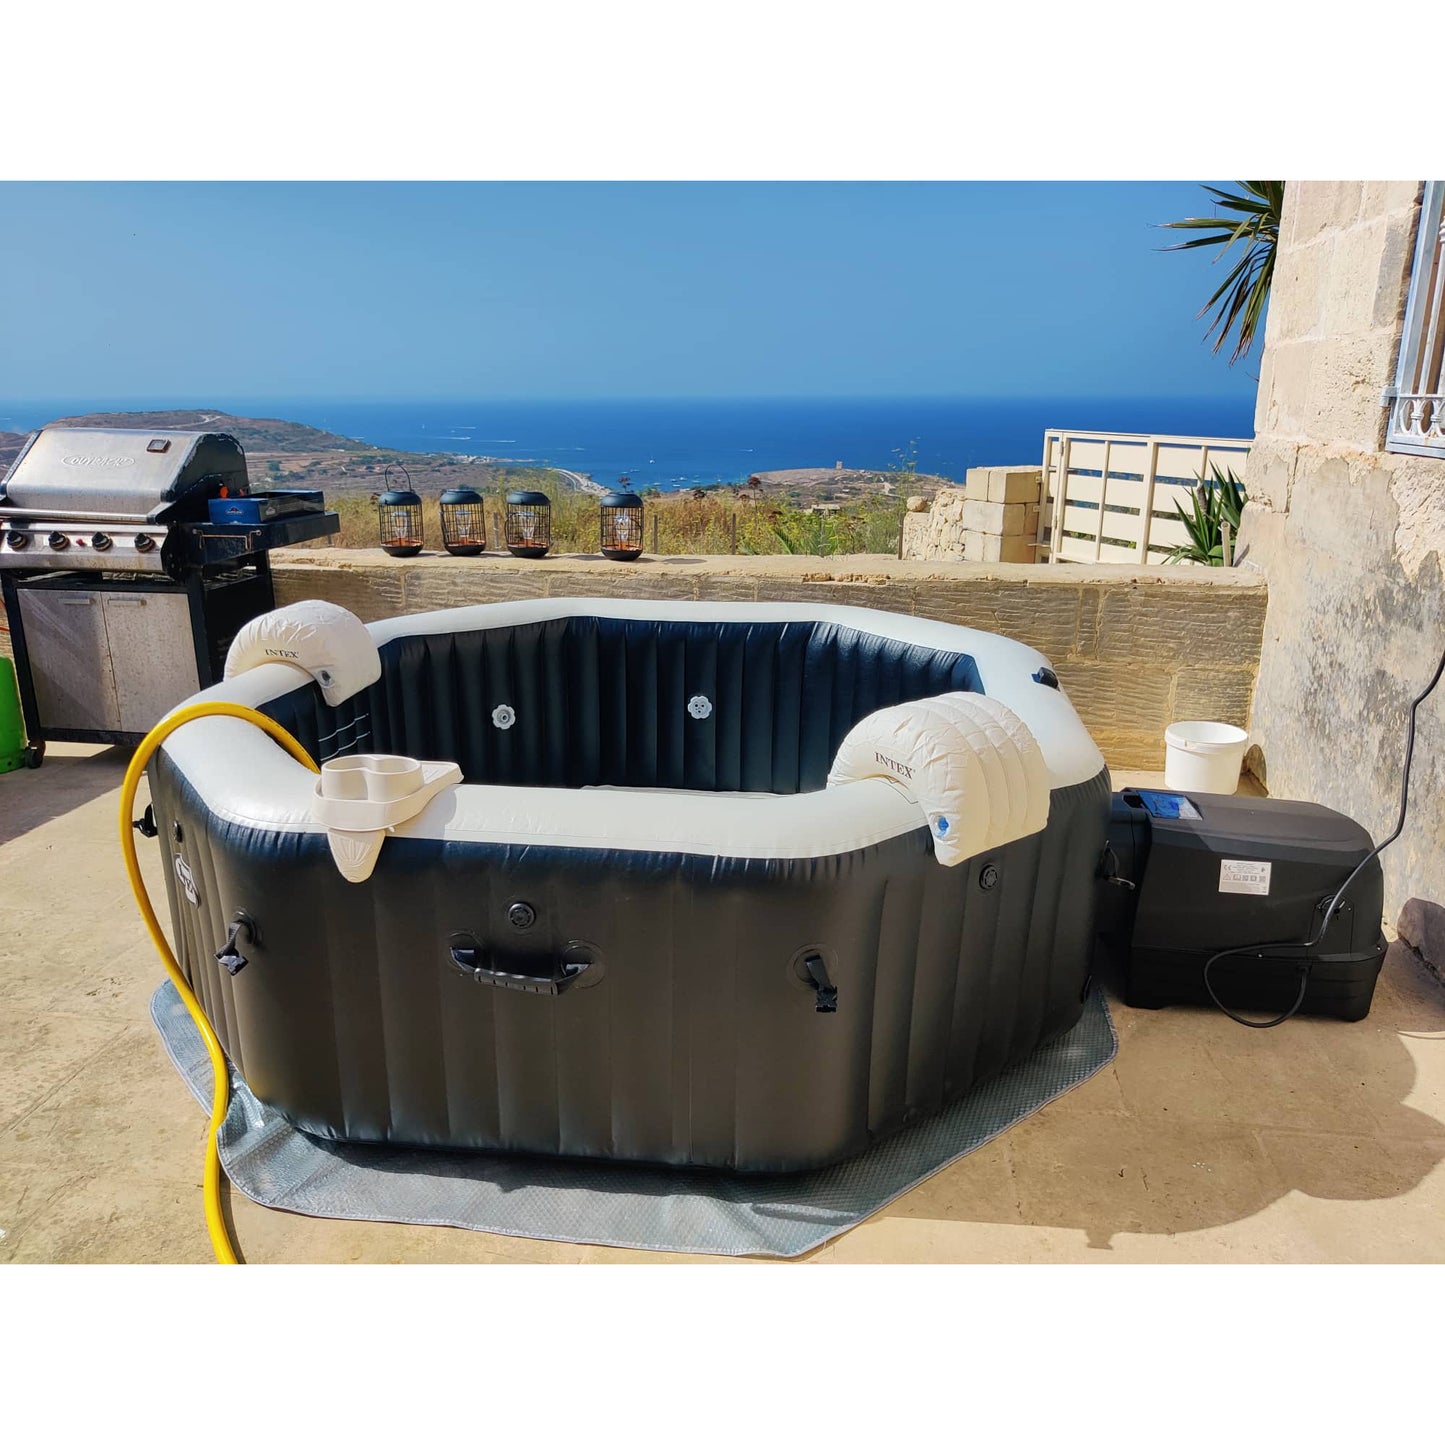 Intex Jet and Bubble Deluxe Hot Tub - 6 person